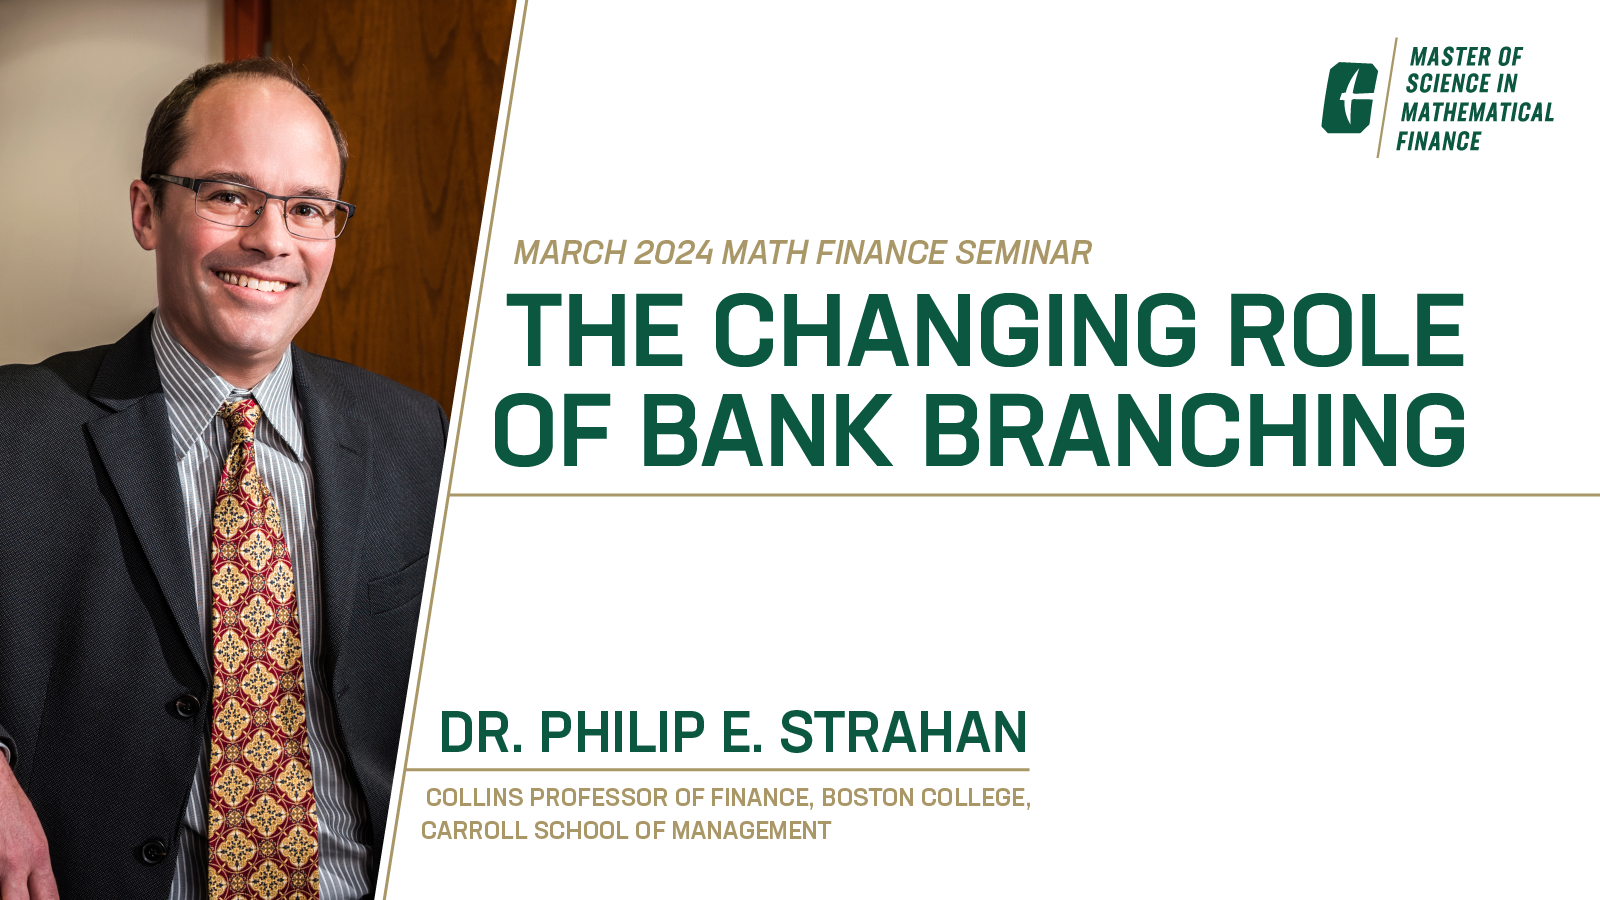 The Changing Role of Bank Branching featuring Philip E. Strahan, Collins Chair in Finance, Carroll School of Management, Boston College